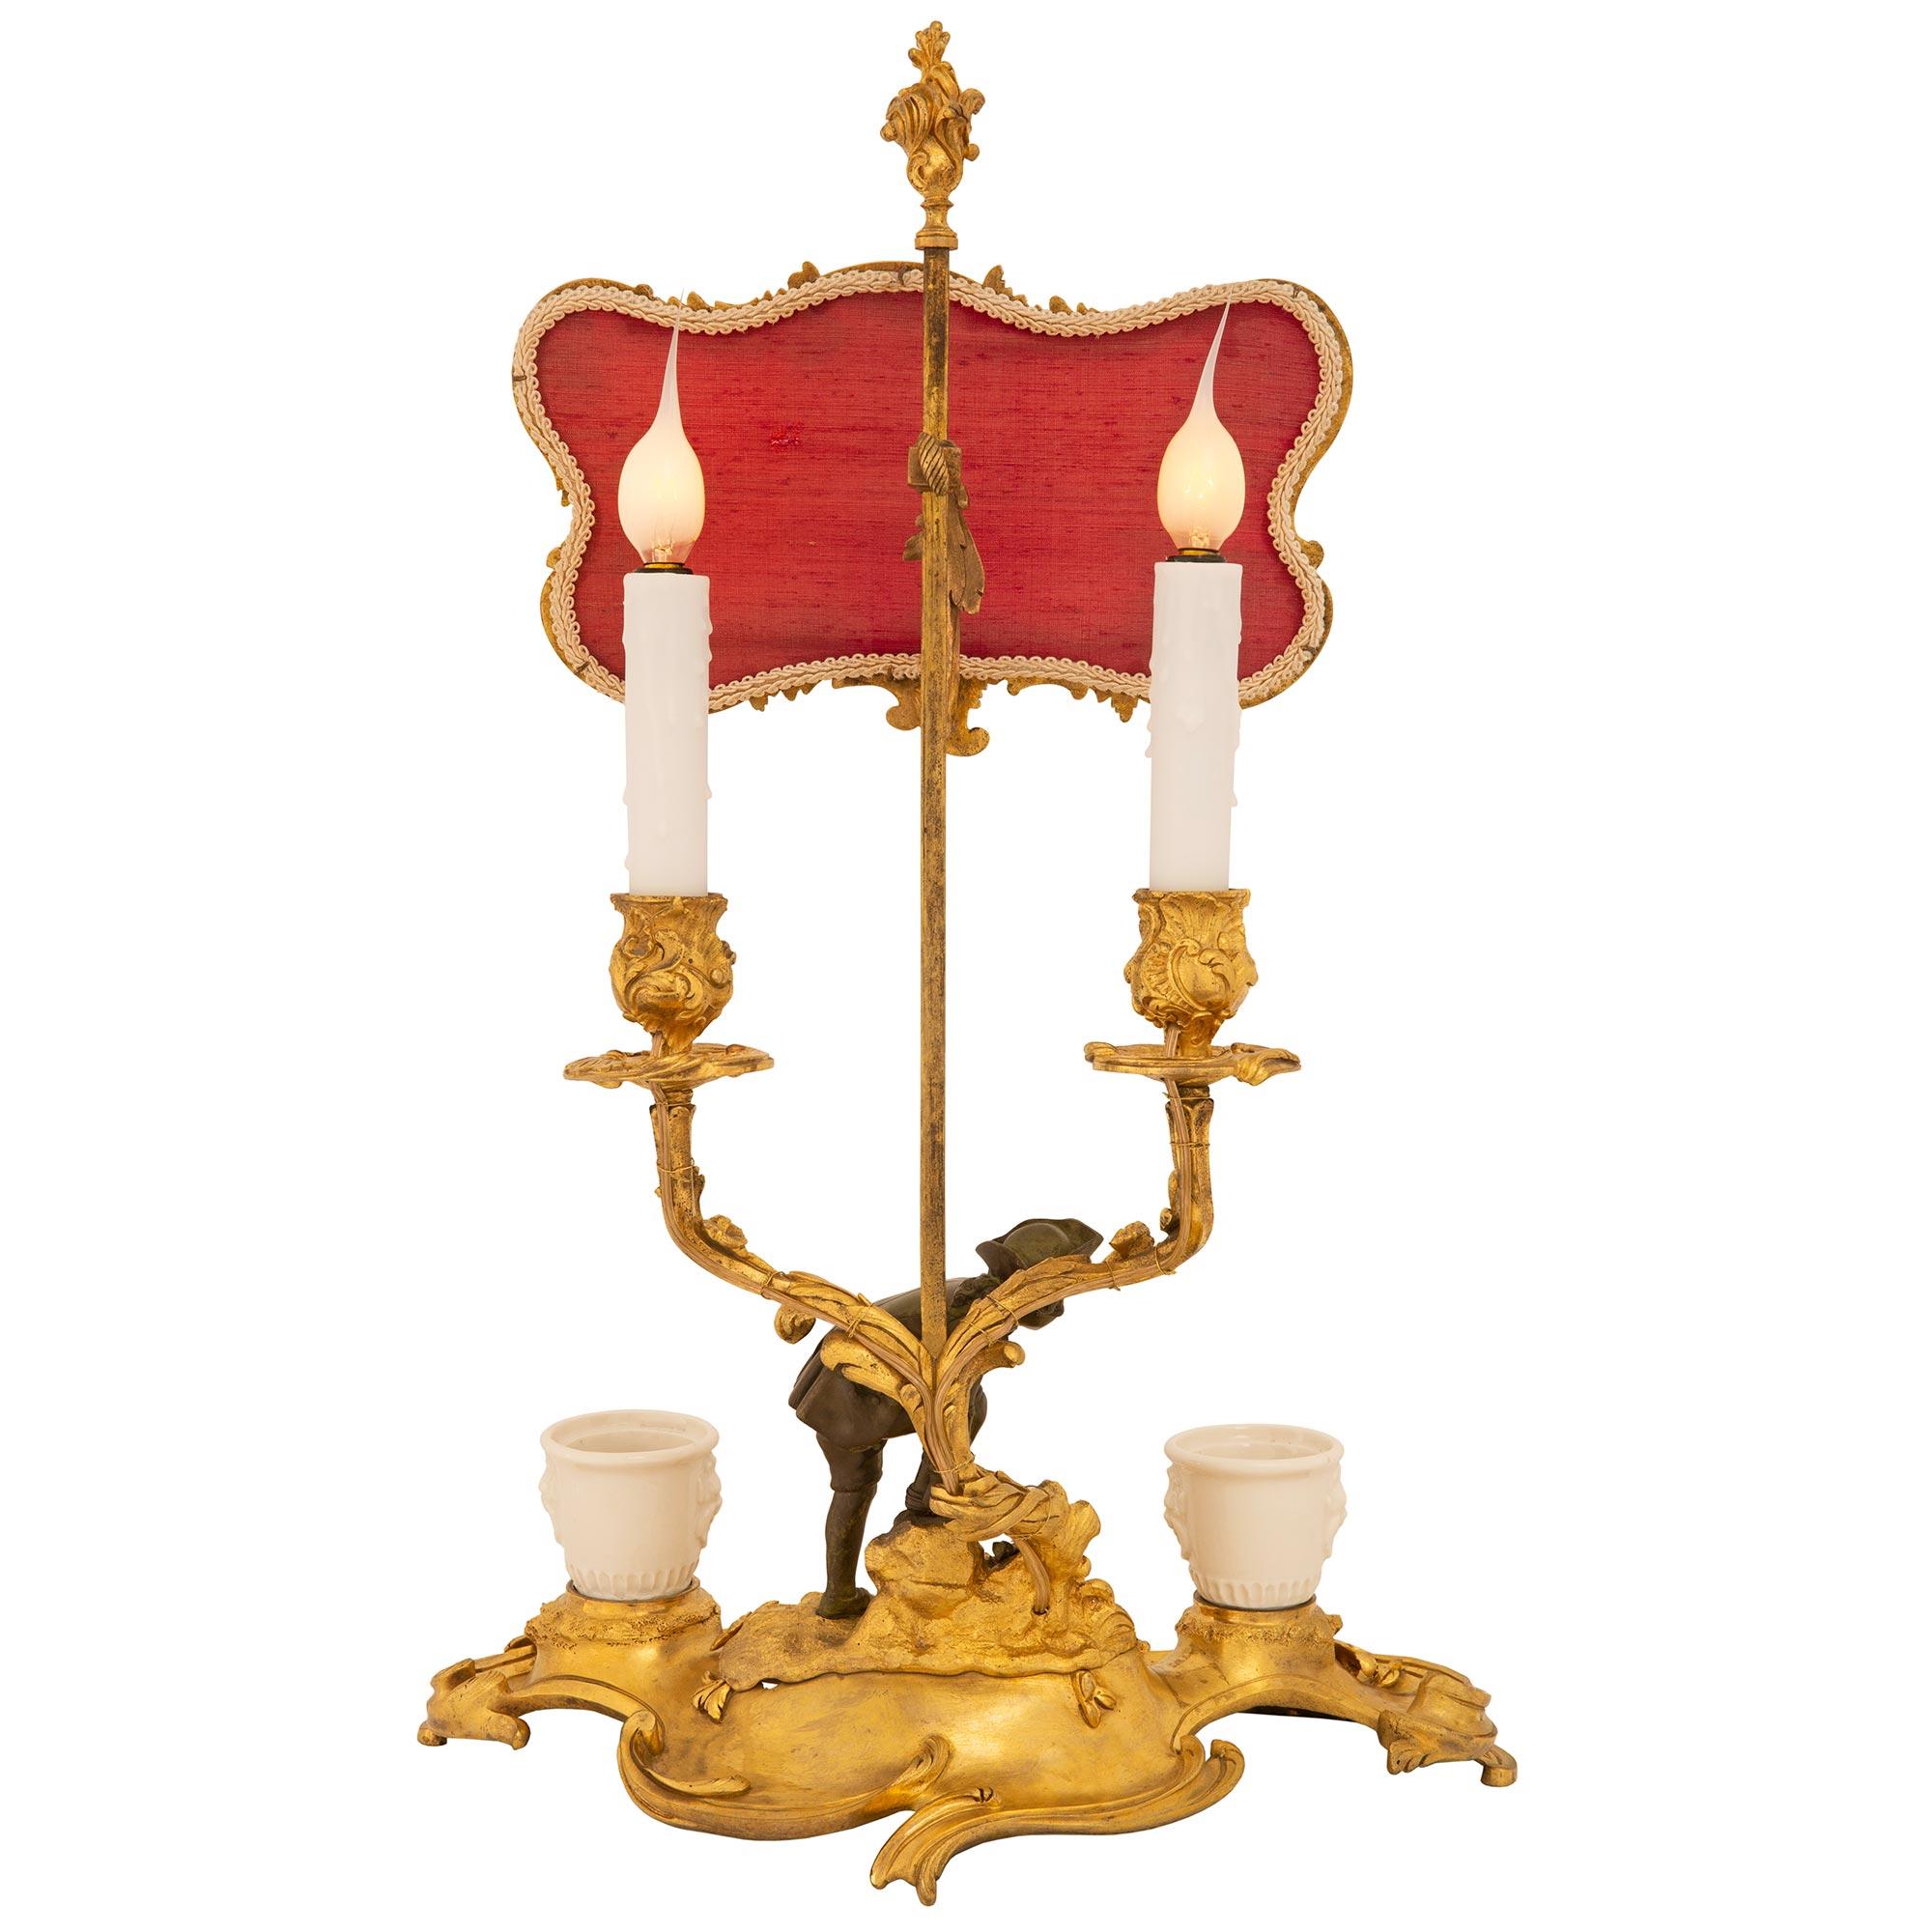 French Mid-19th Century Louis XV Style Ormolu Candelabra Lamp For Sale 1